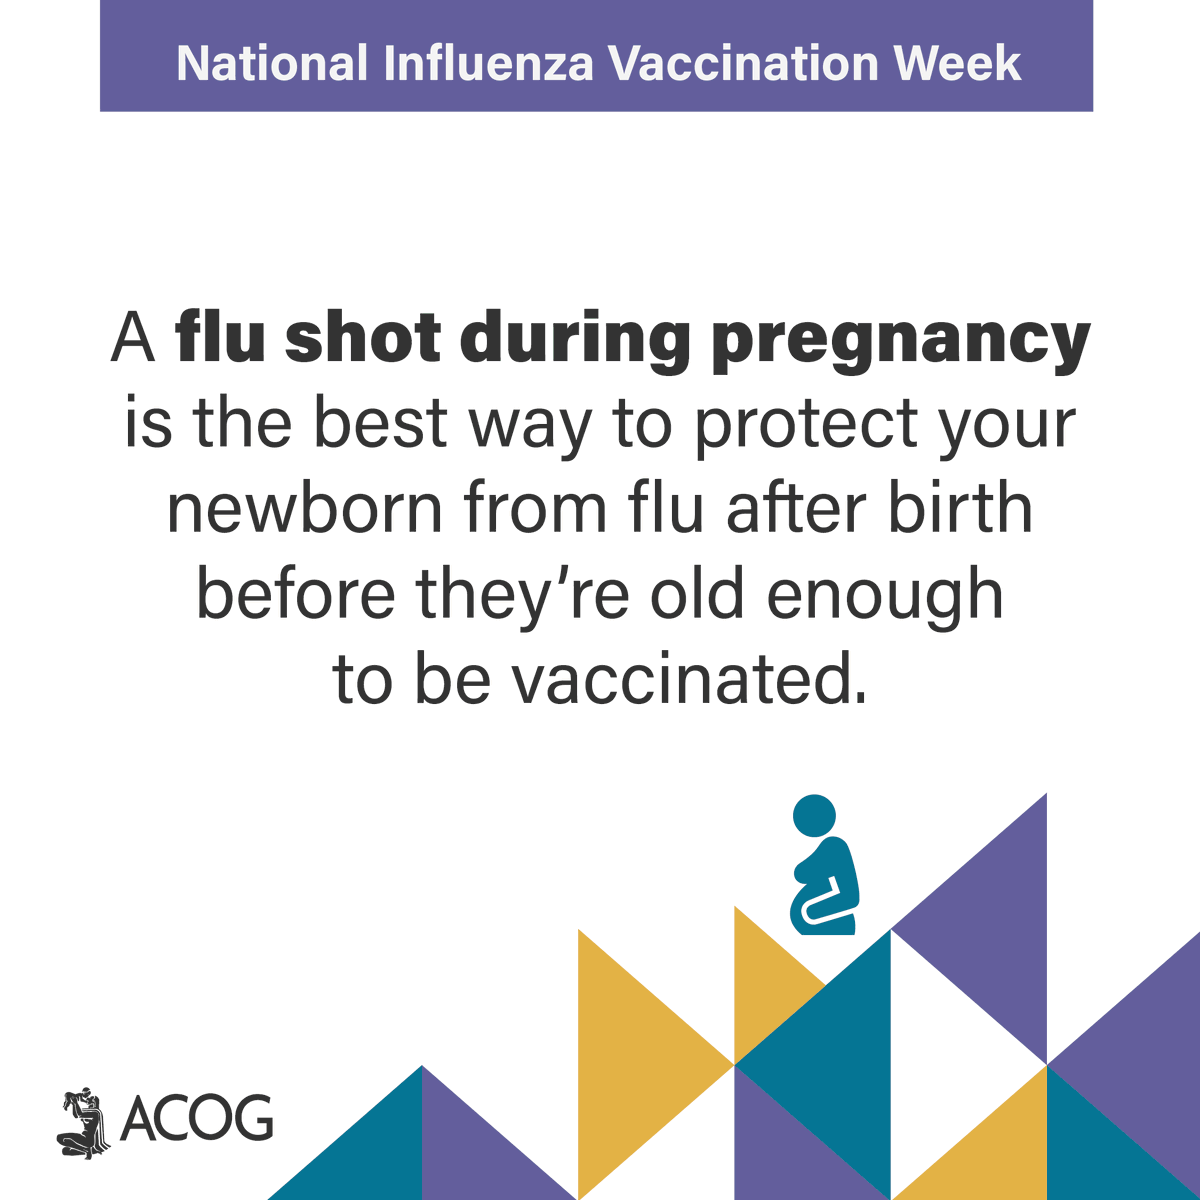 #Flu vaccines are an important part of prenatal care and can protect pregnant people and fetuses. ACOG recommends a flu shot for everyone who is or will be pregnant during flu season. Learn more about the flu vaccine and pregnancy: bit.ly/3t2JZ3S #fightflu #NIVW